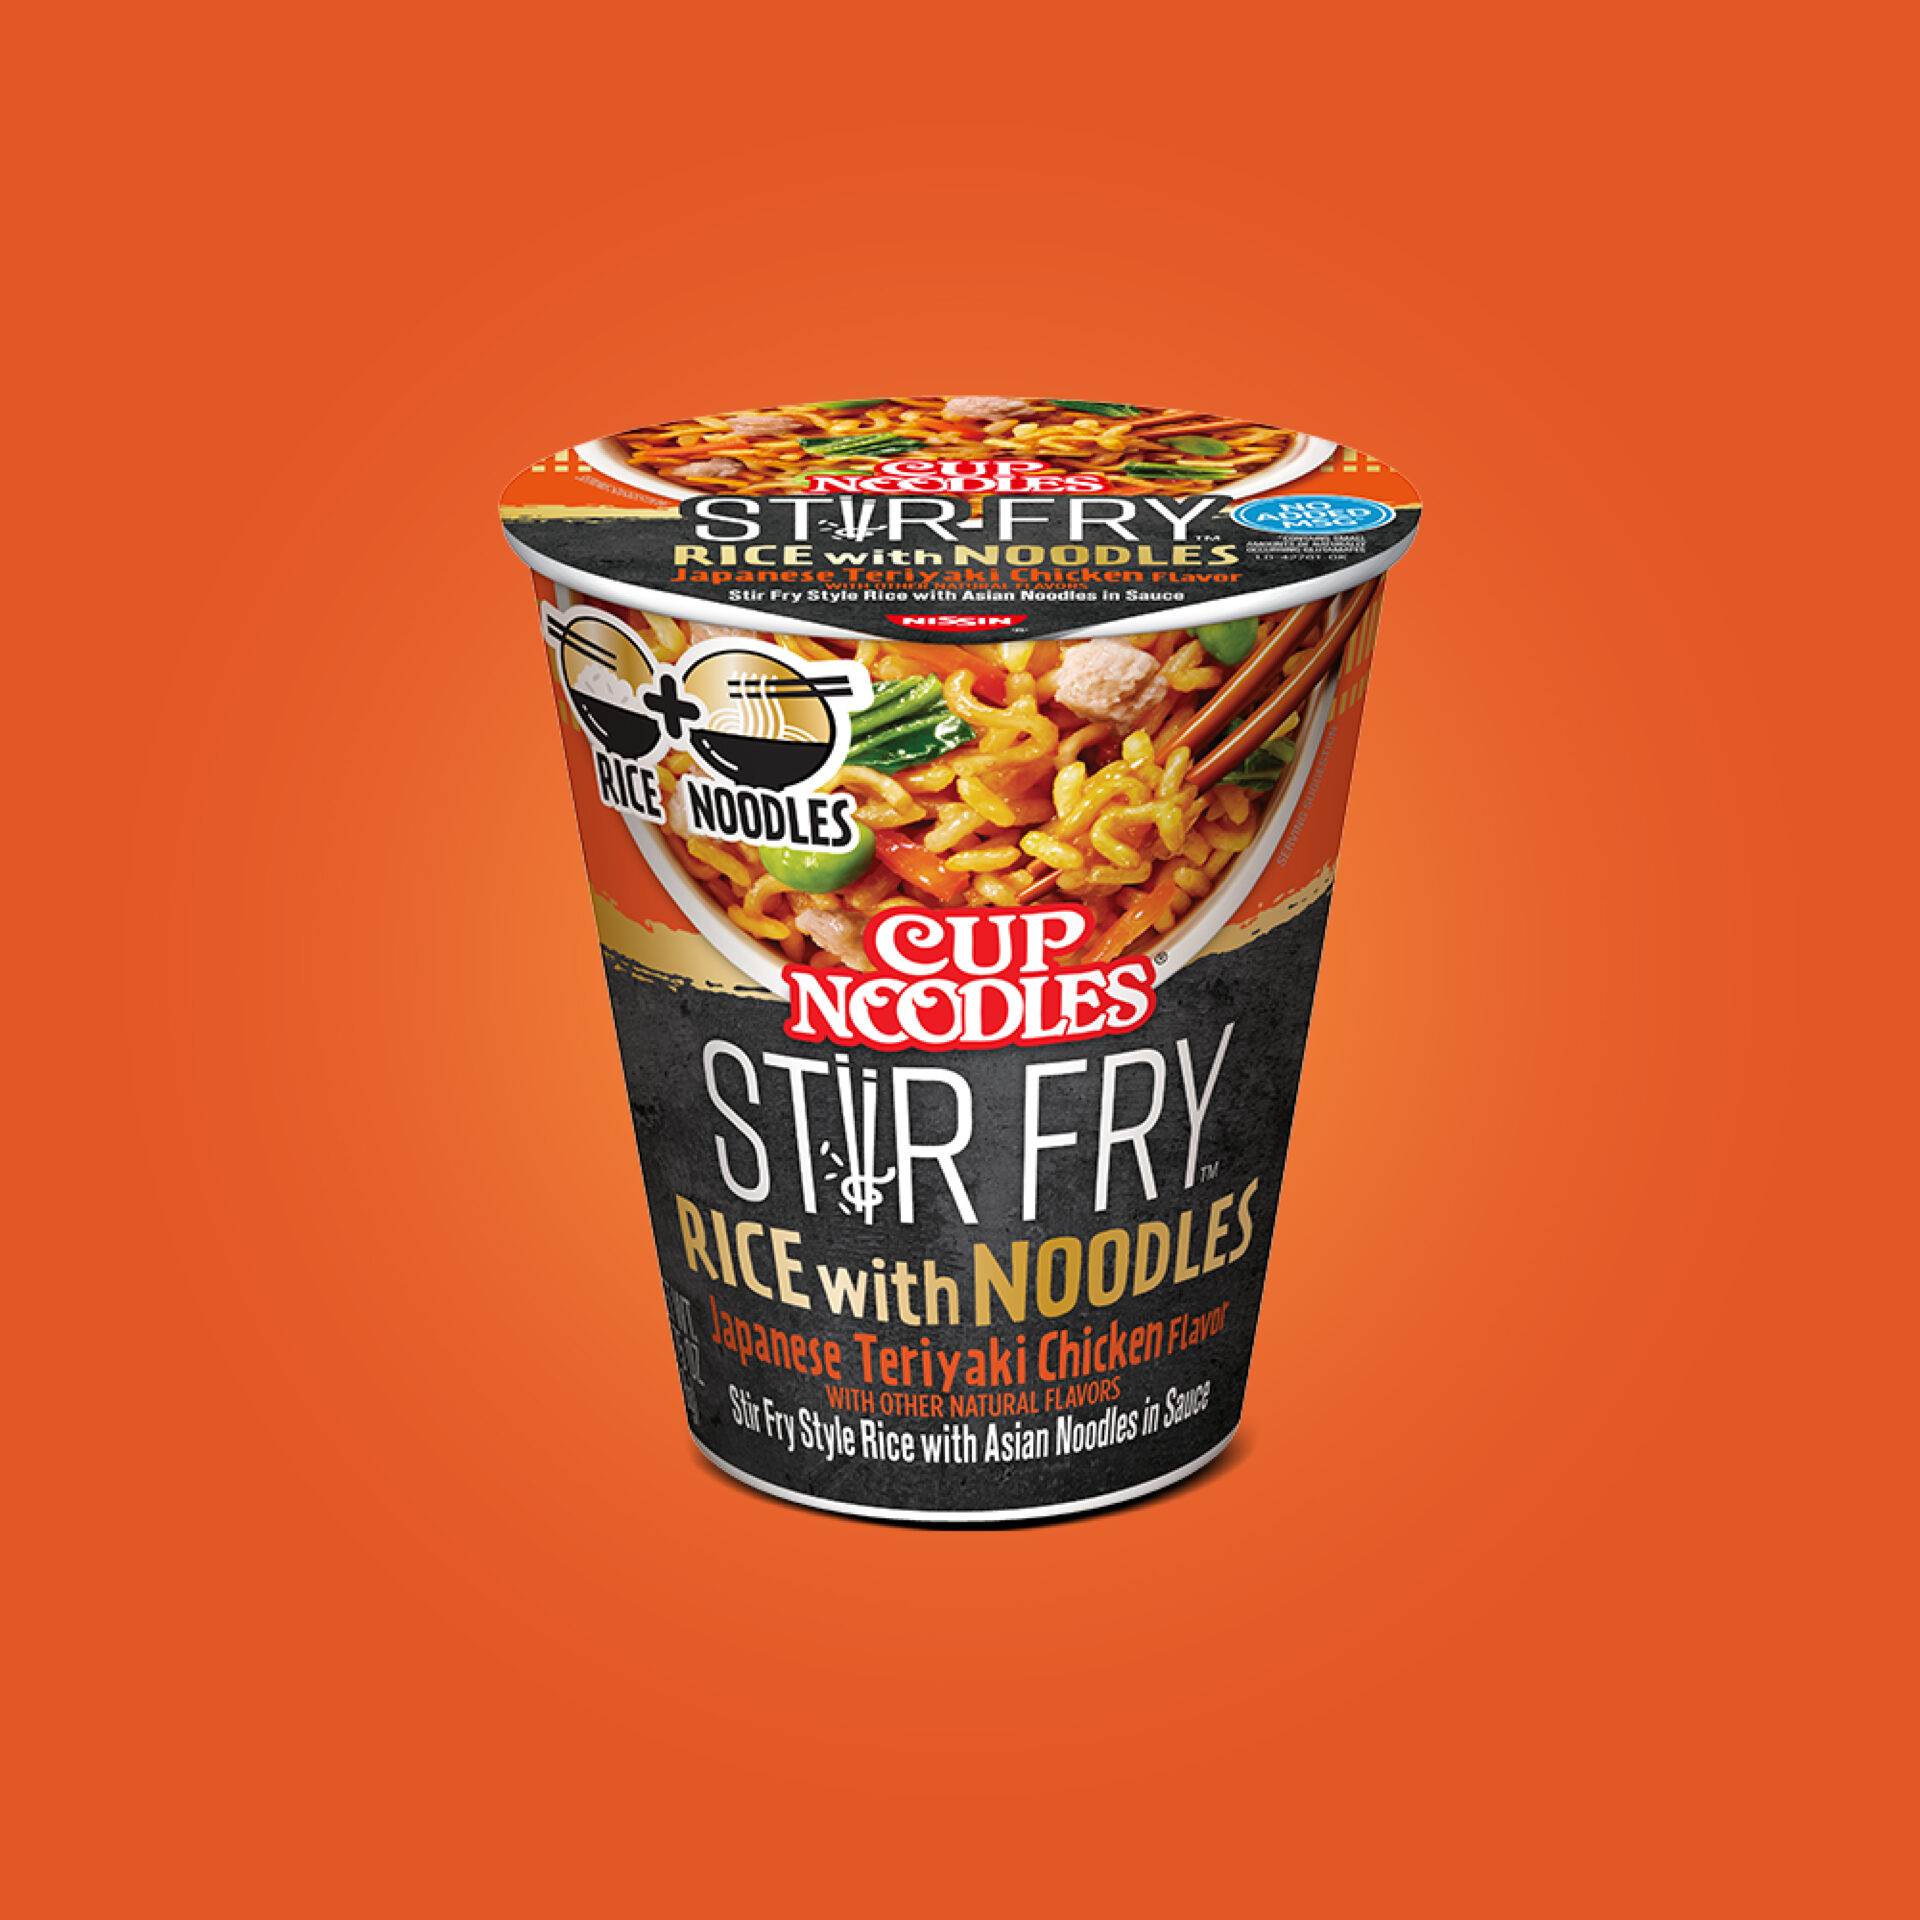 Cup Noodles Stir Fry Rice With Noodles Japanese Teriyaki Chicken